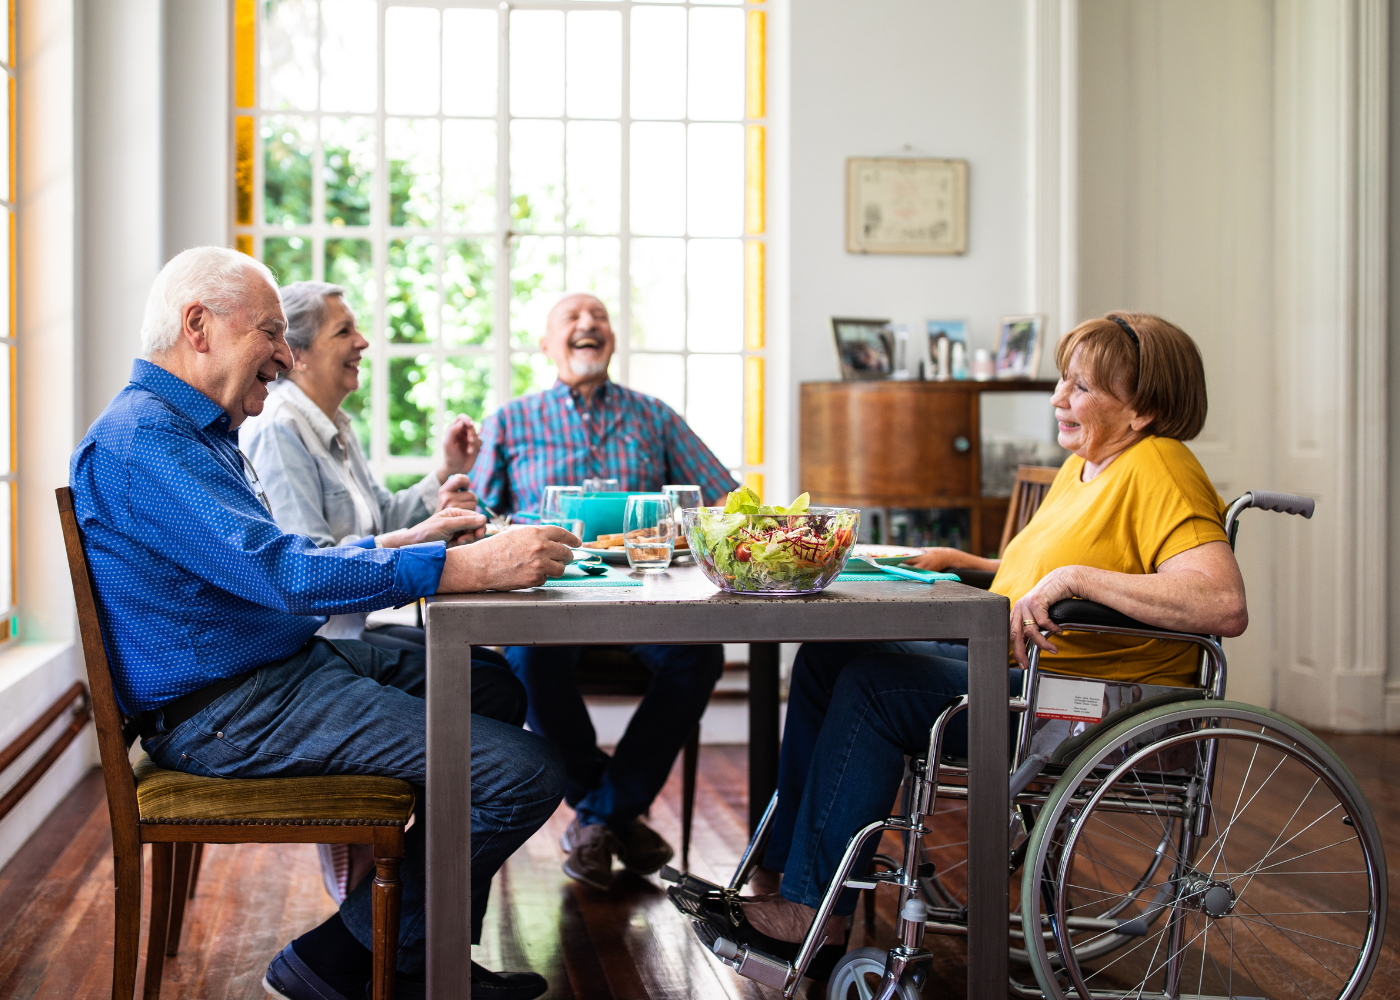 Two elderly couples socializing over a meal, with one woman in a wheelchair Wilcox Electric DC